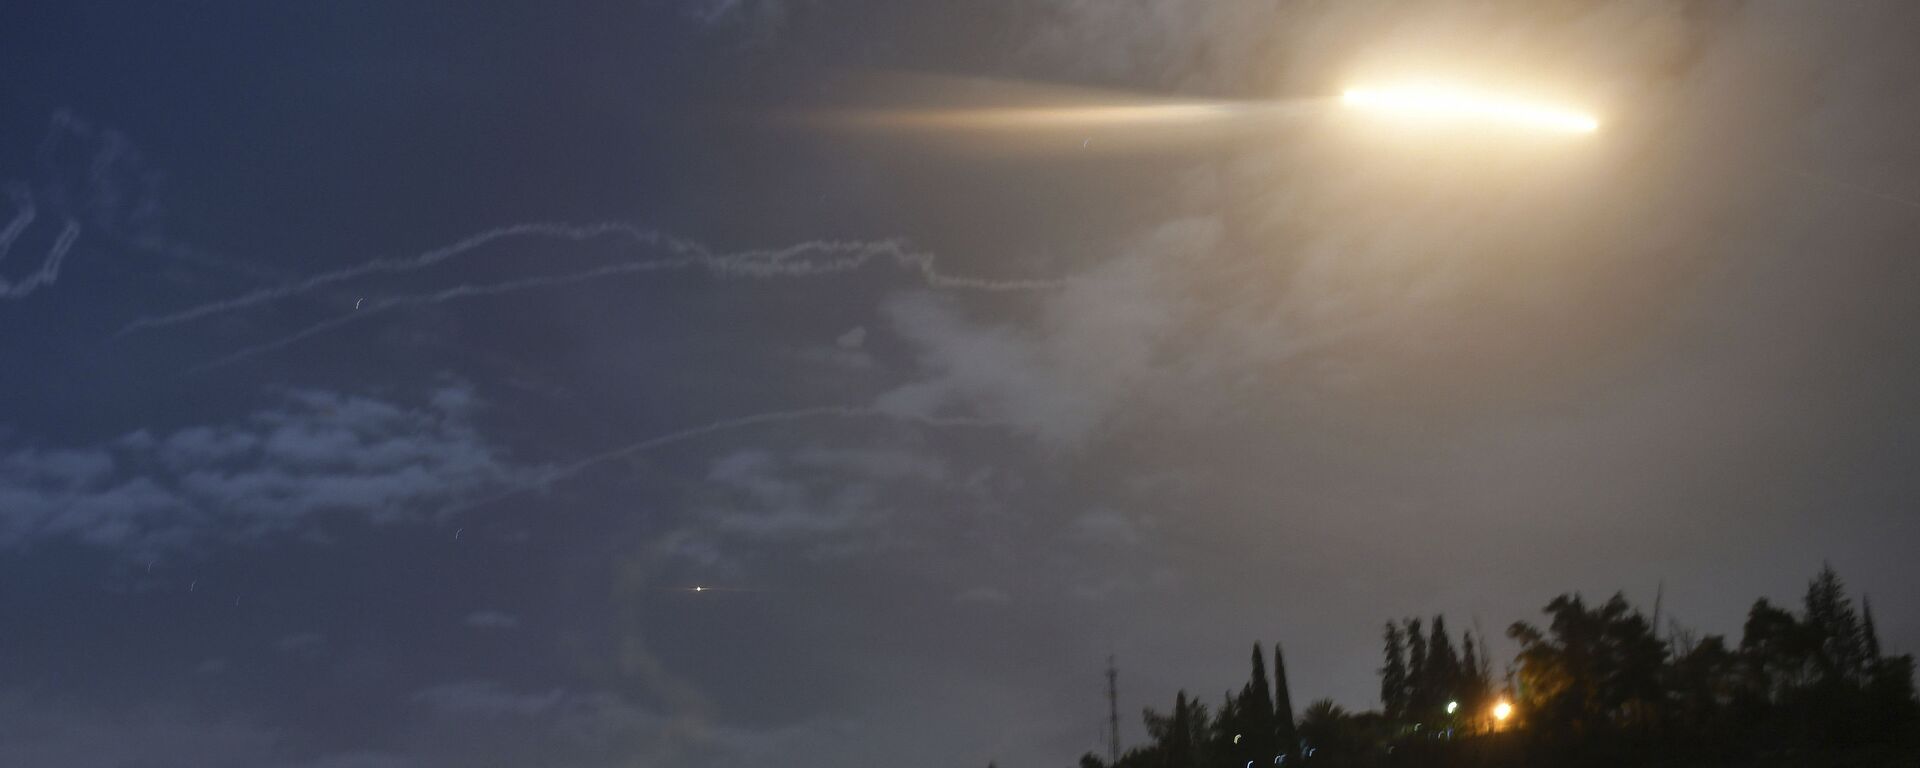 In this photo released by the Syrian official news agency SANA, shows missiles flying into the sky near international airport, in Damascus, Syria, Monday, Jan. 21, 2019 - Sputnik International, 1920, 08.06.2022